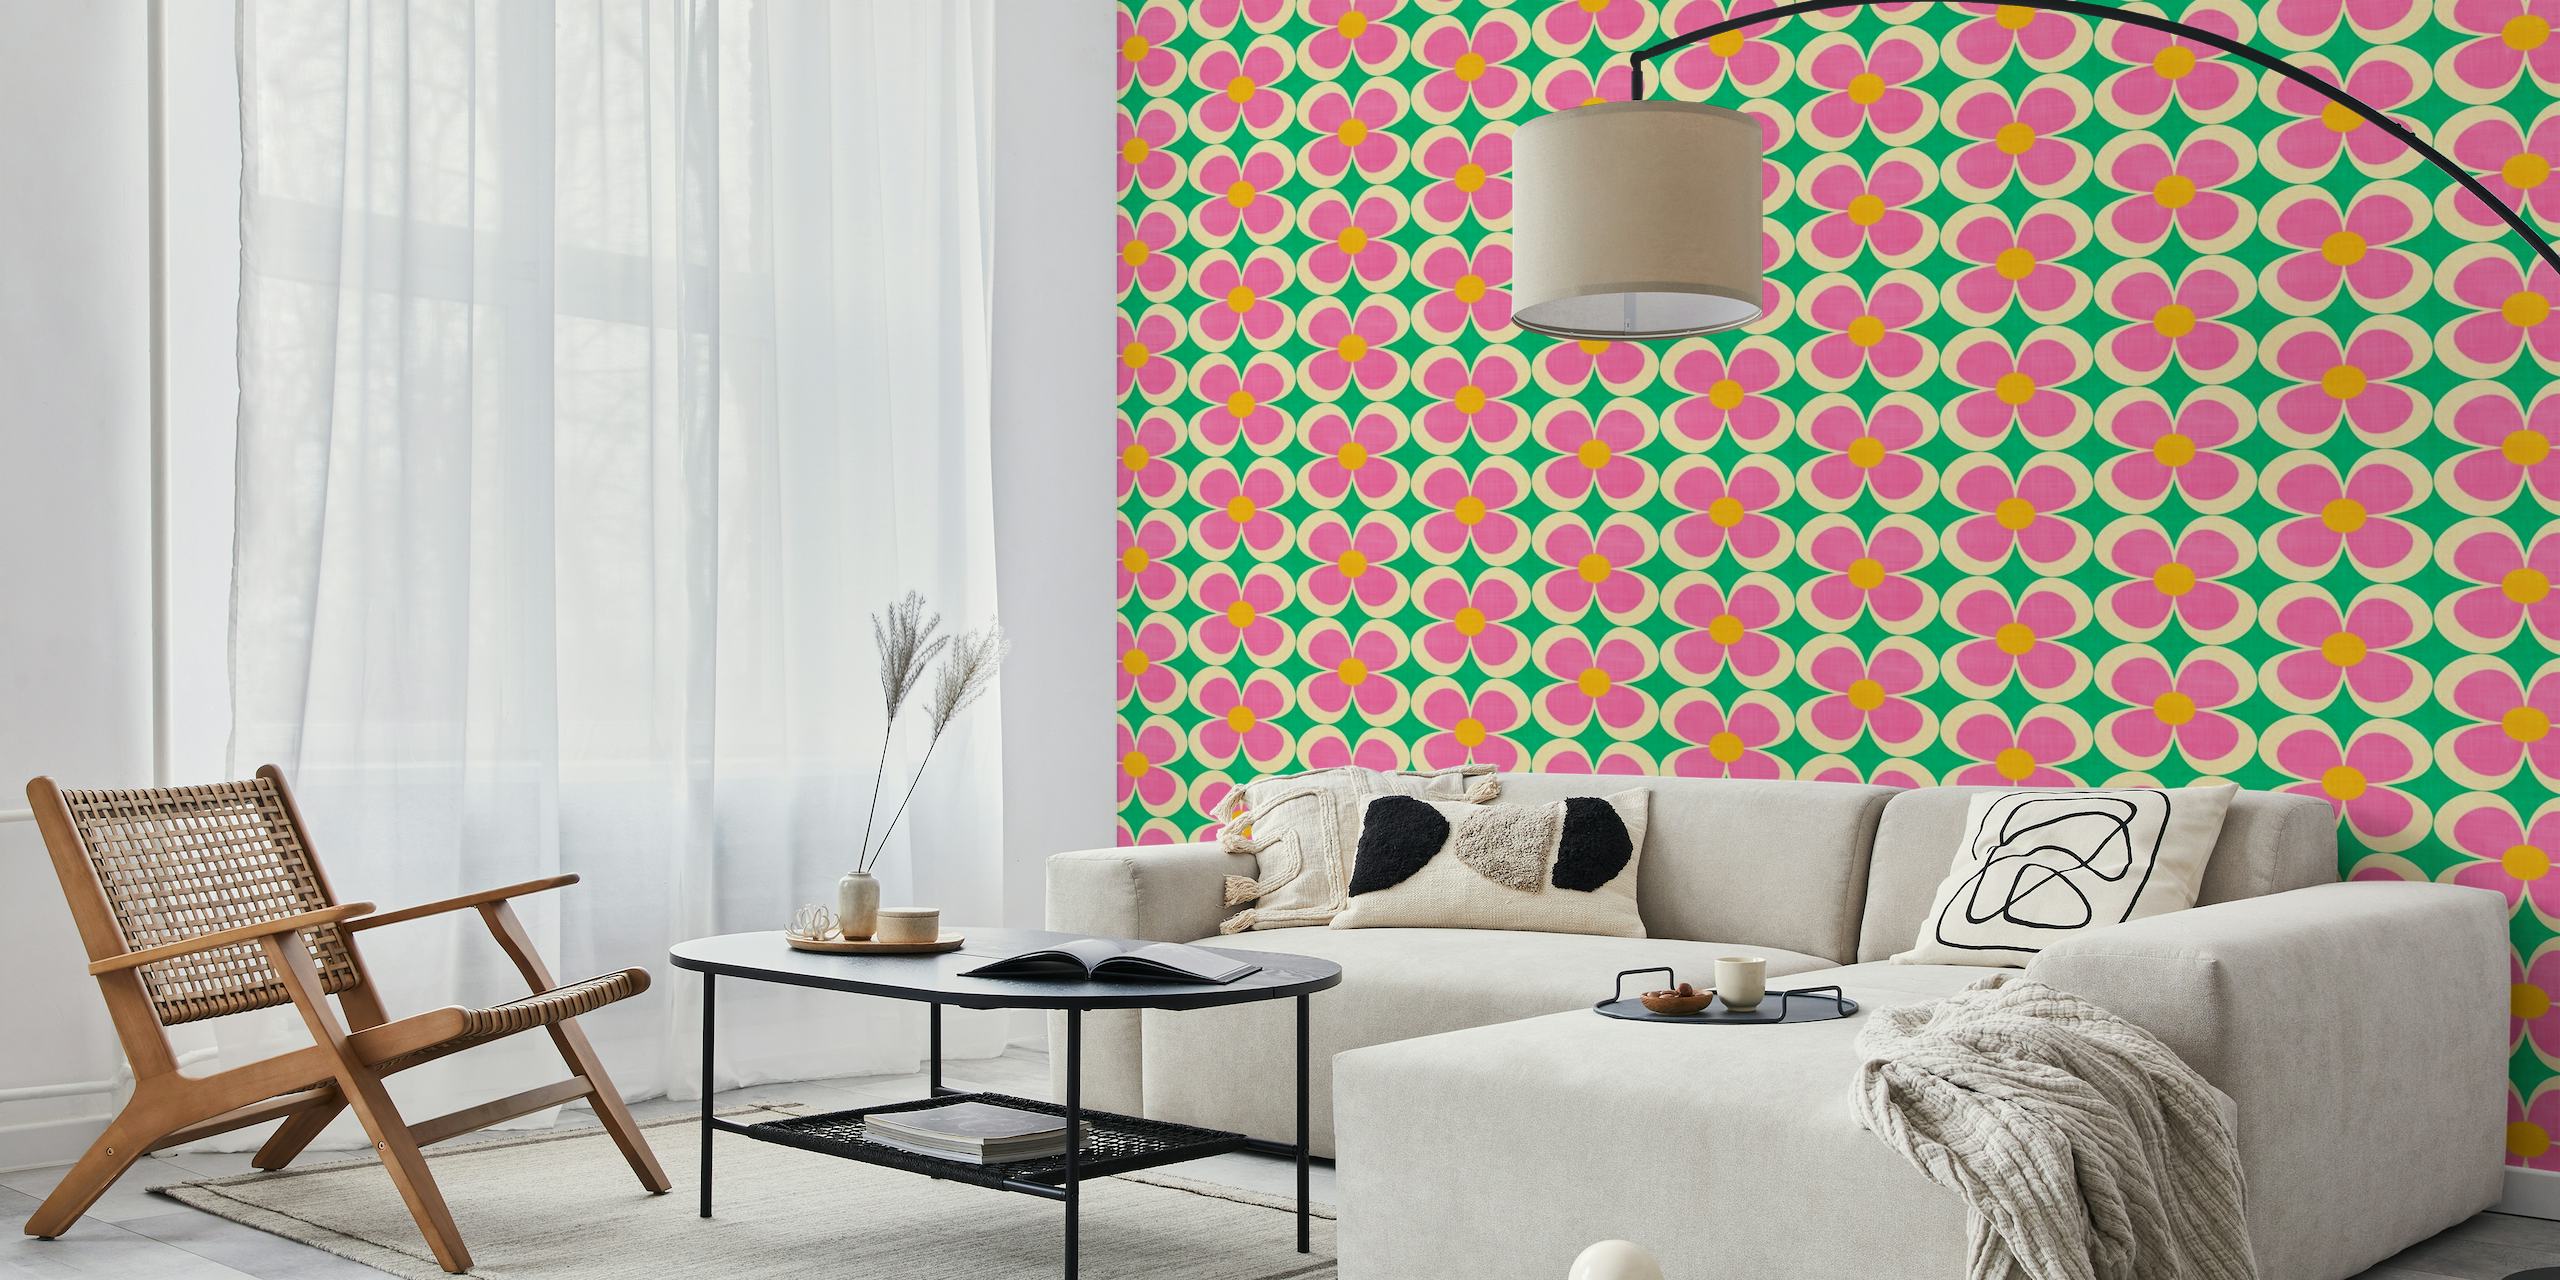 Groovy Geometric Floral Pink and Green Small papel pintado